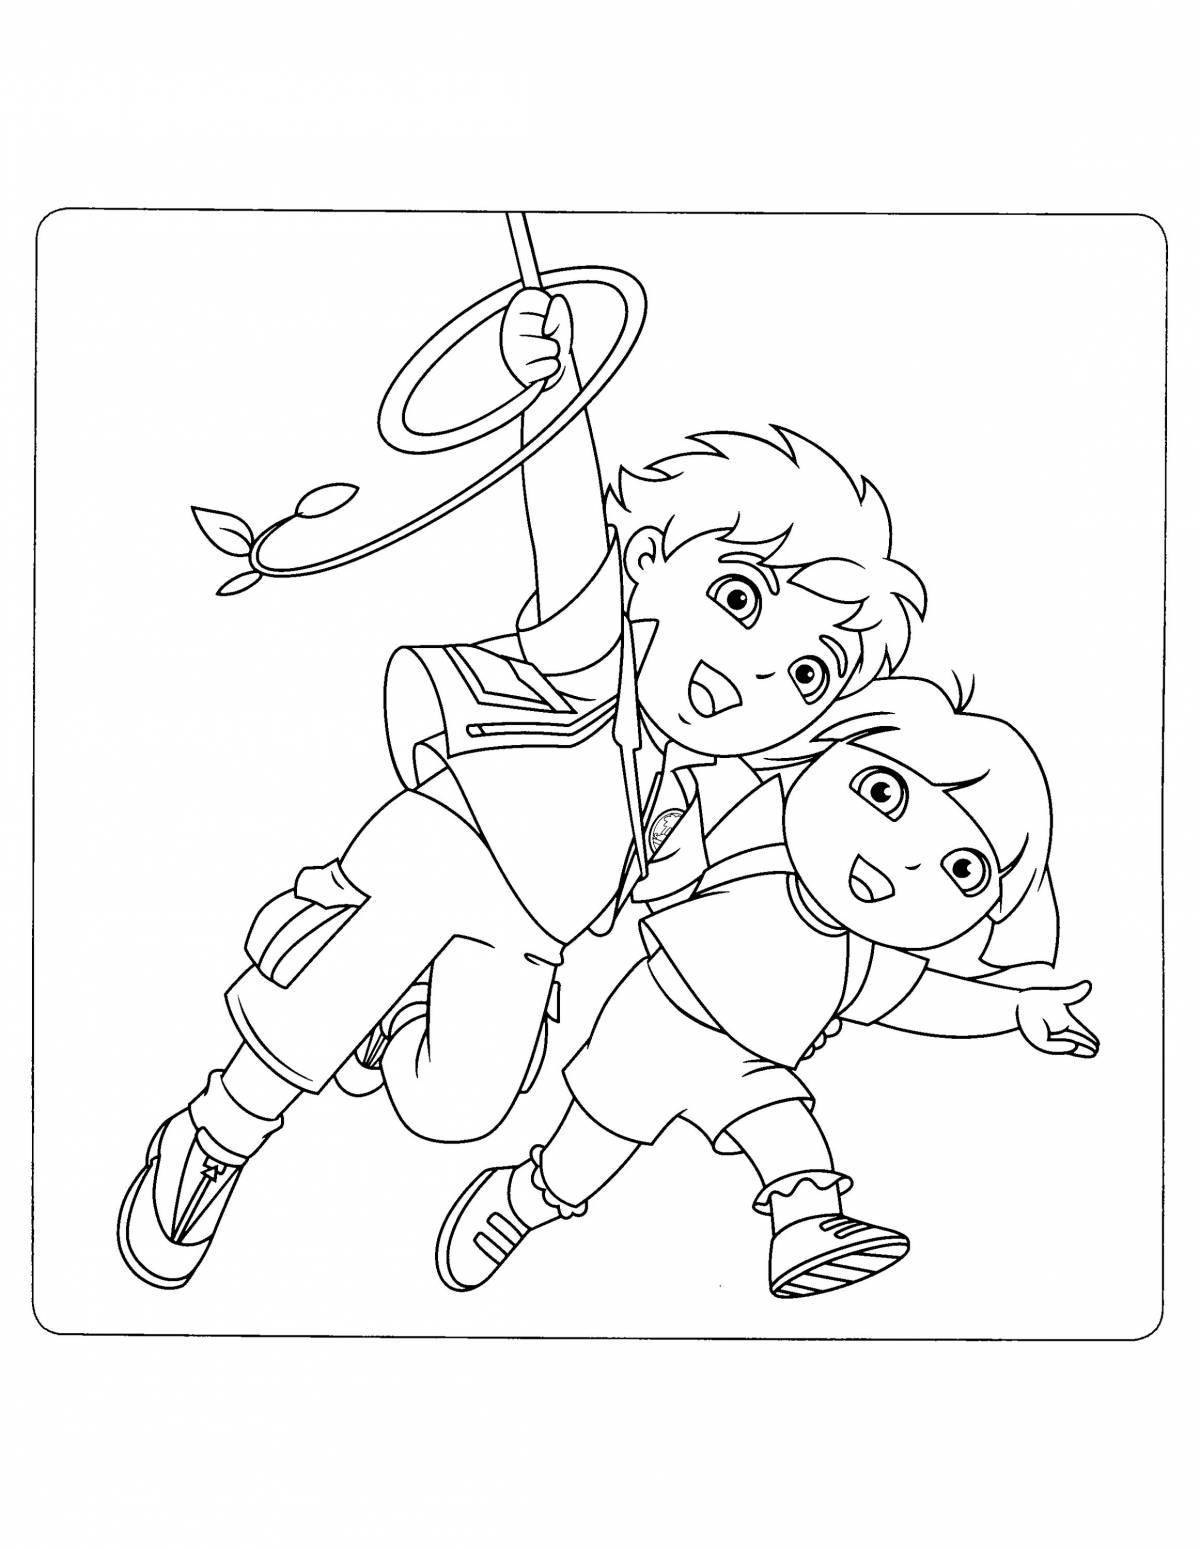 Diego's animated coloring page